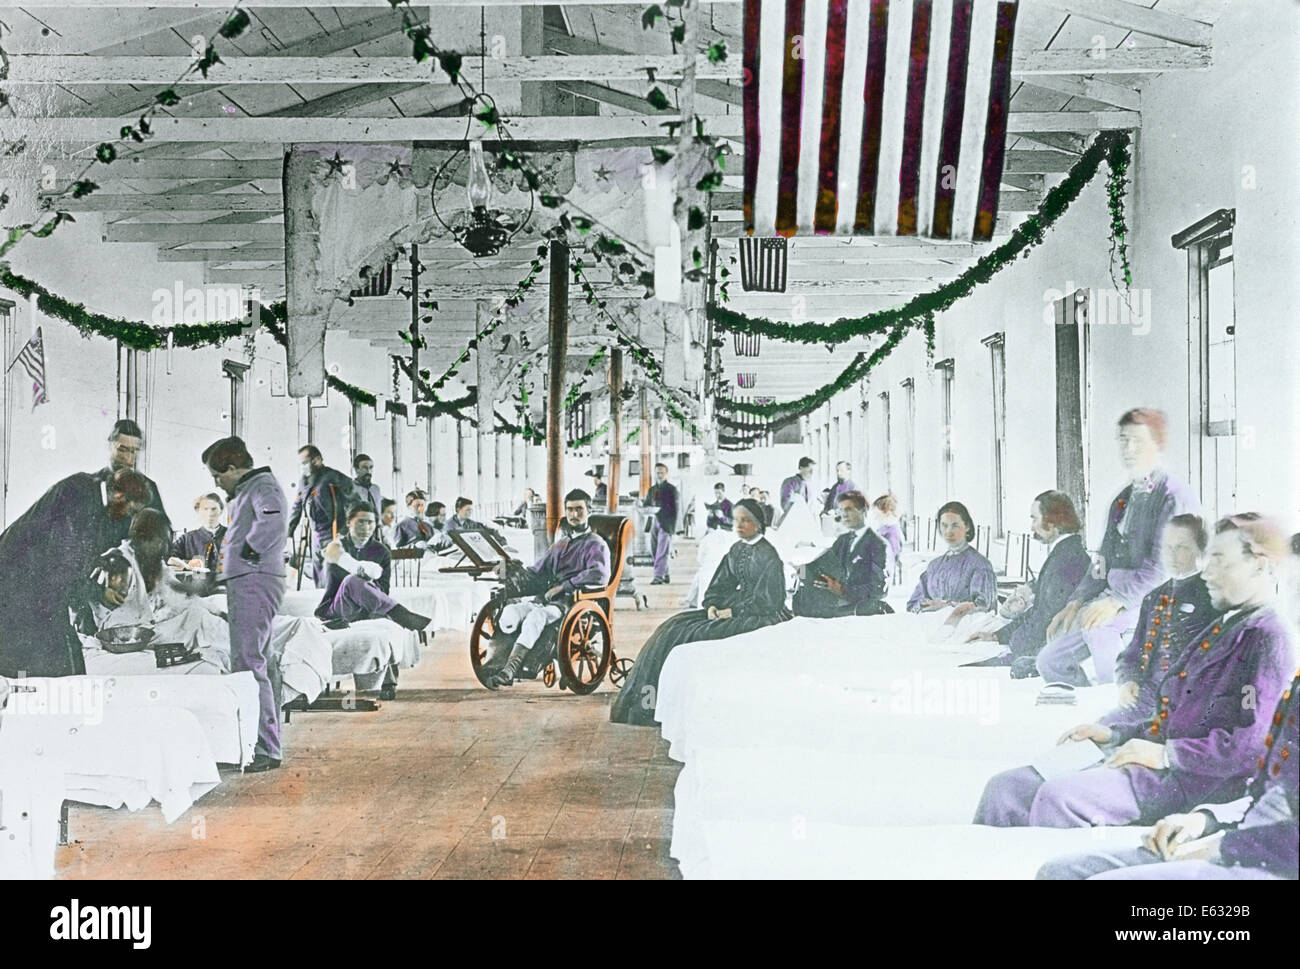 CIVIL WAR ERA PHOTOGRAPH 1861 TO 1865 INTERIOR OF UNION ARMY HOSPITAL WITH PATIENTS AND MEDICAL STAFF Stock Photo